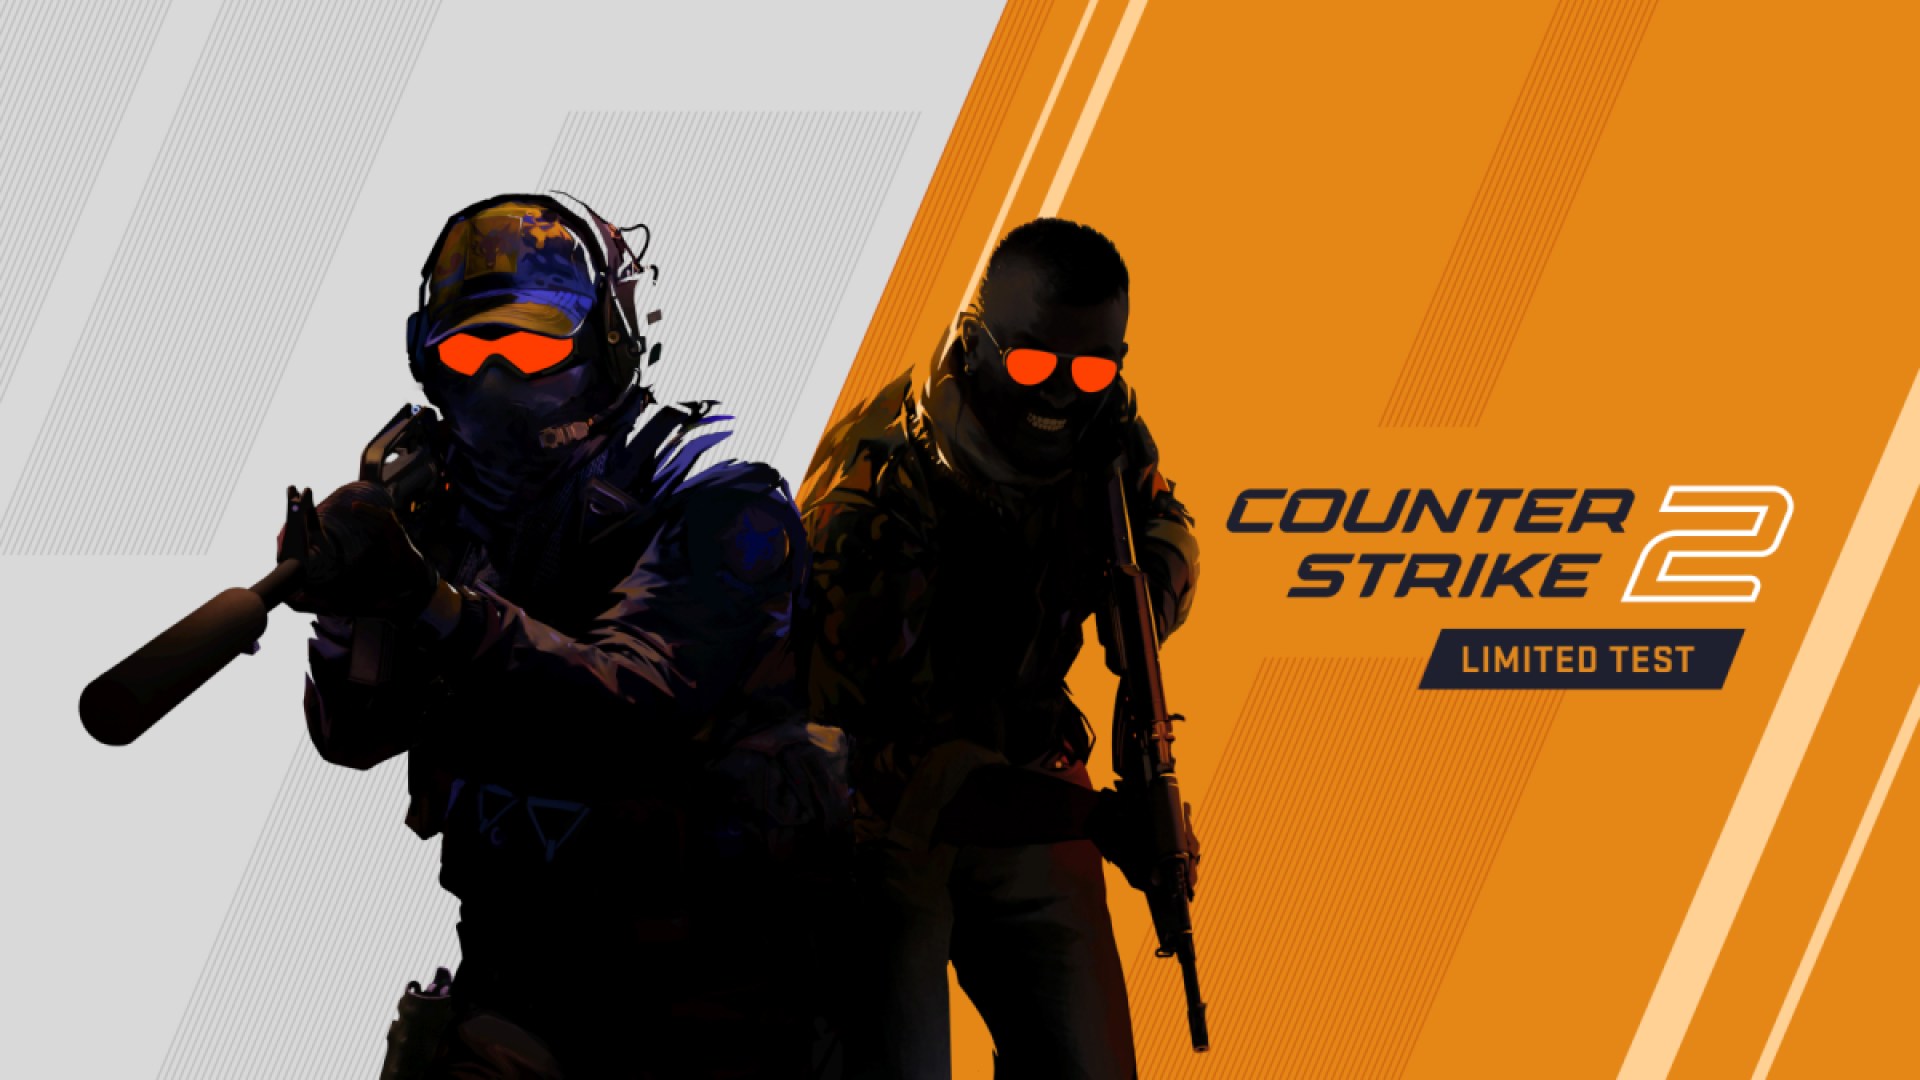 An ad for Counter-Strike 2, with both a counter-terrorist and terrorist.